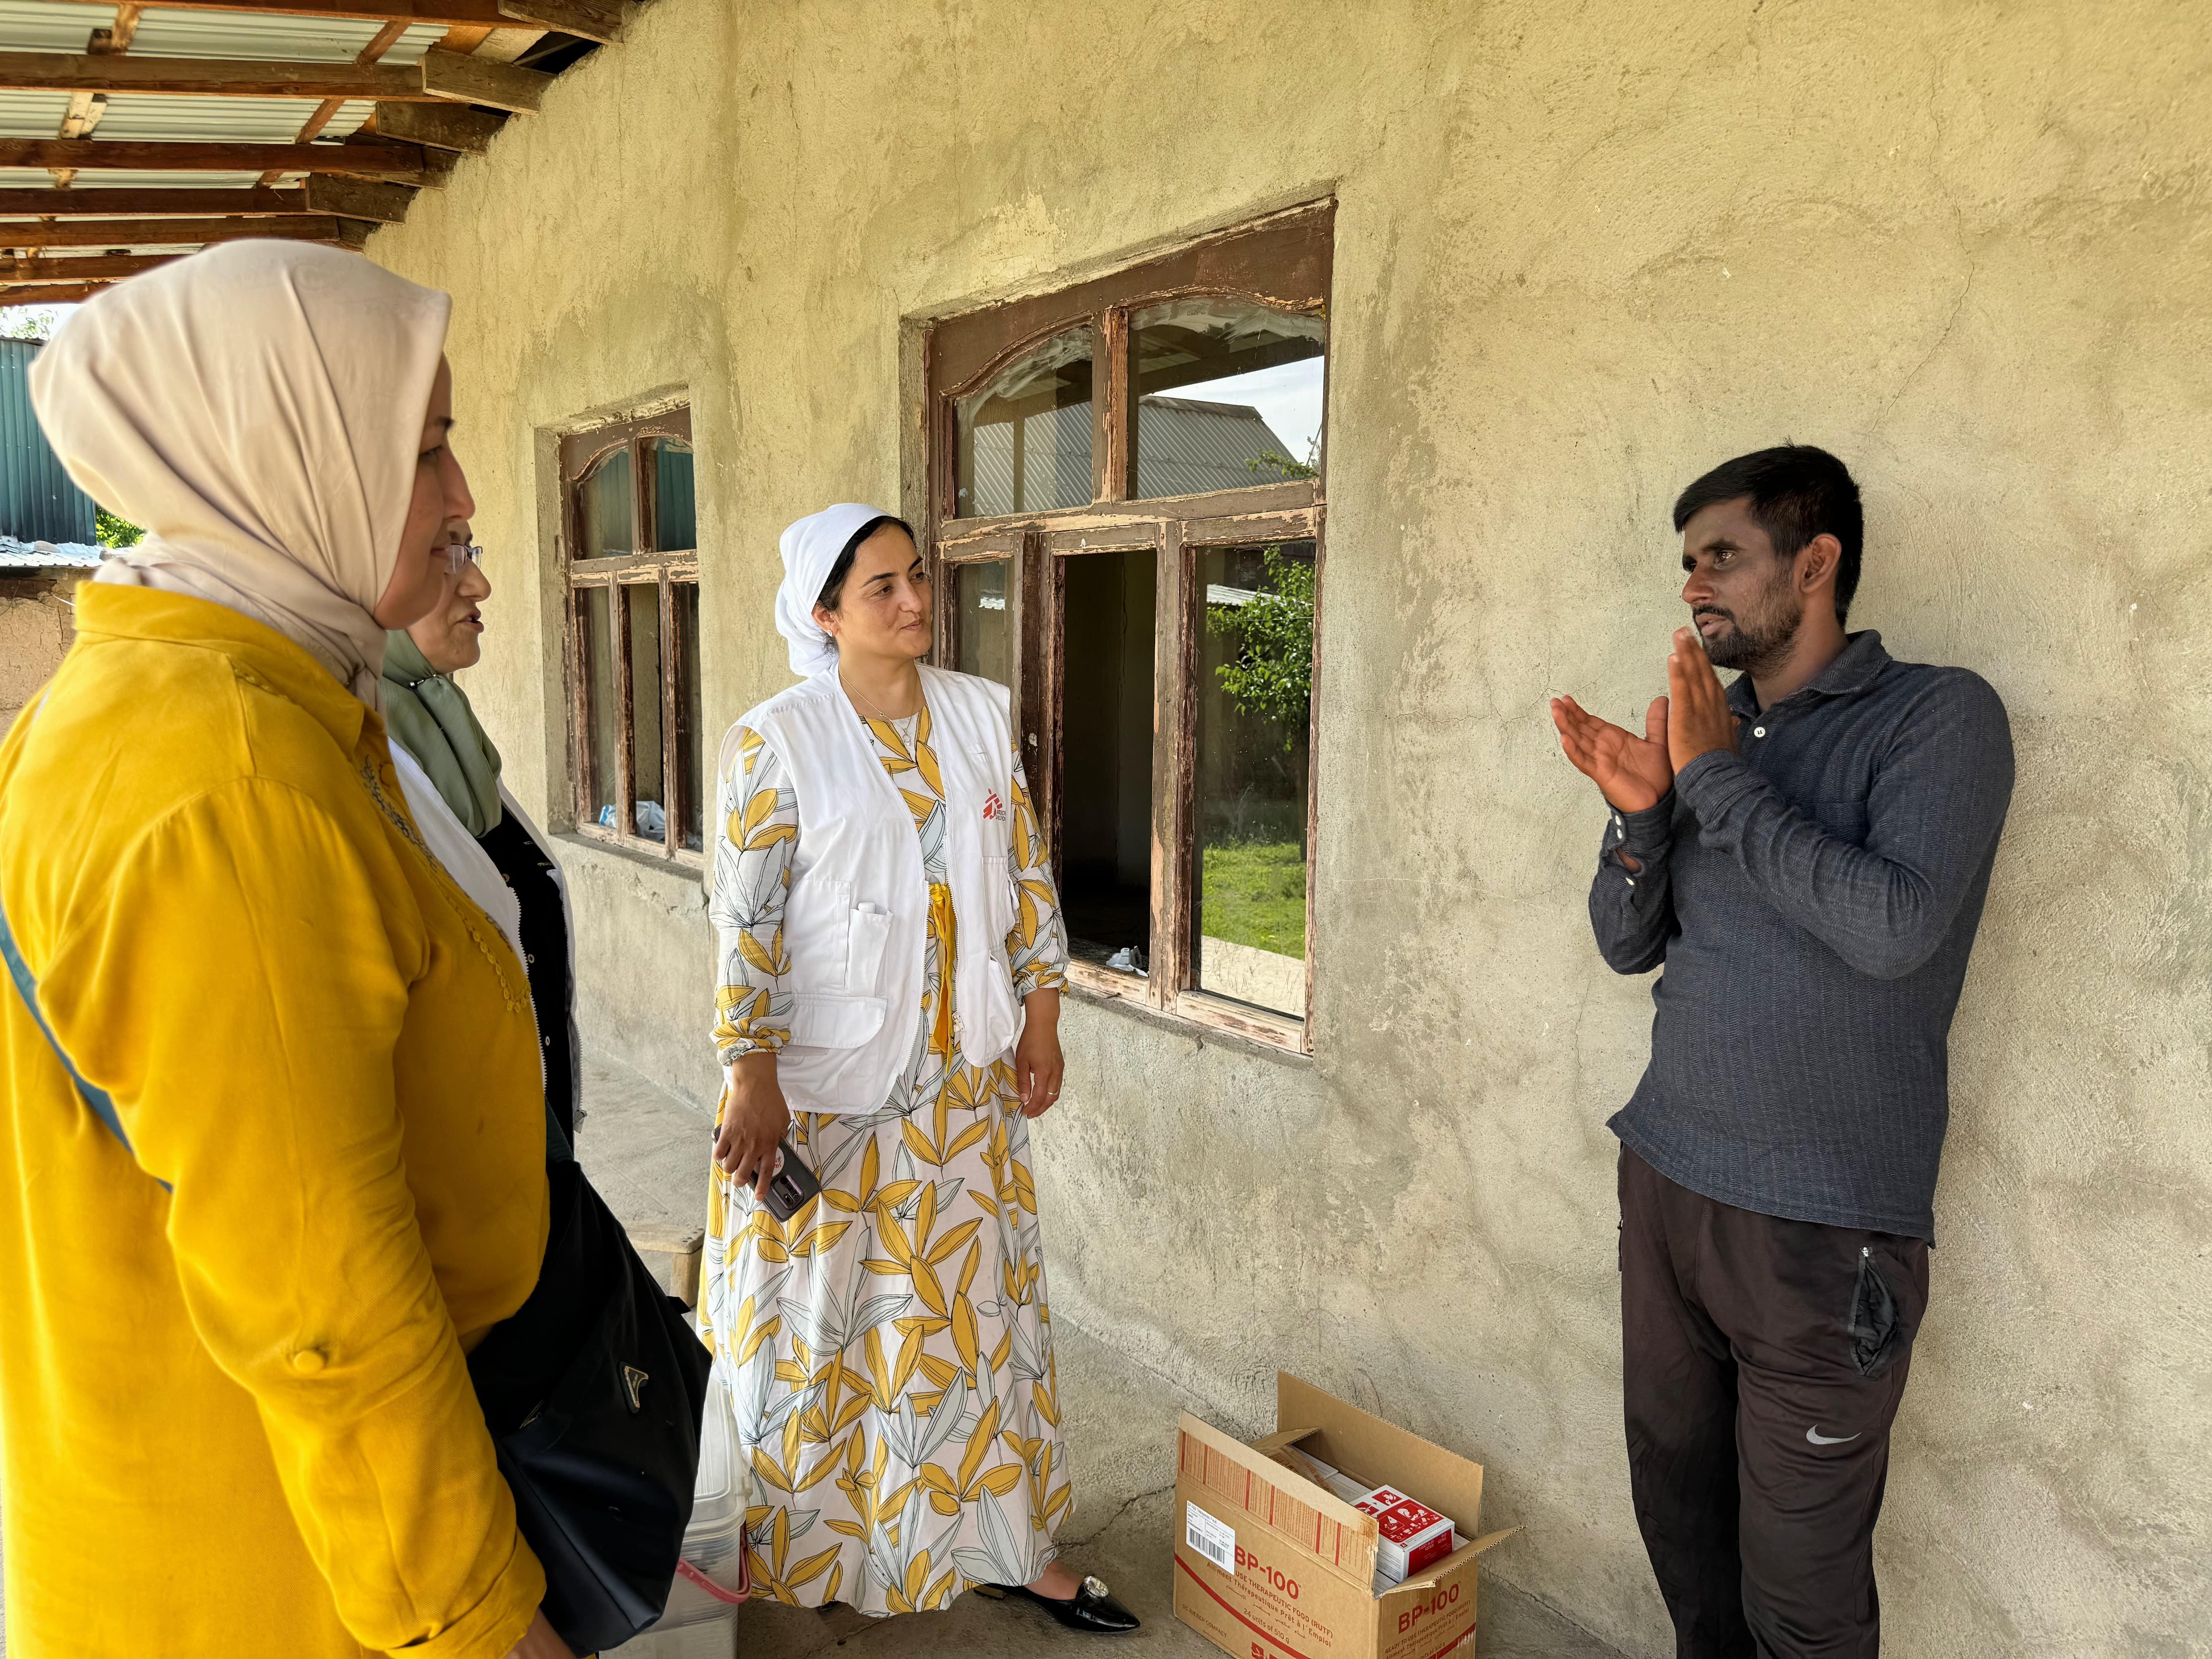 Drug-Resistant TB in Tajikistan: MSF teams, together with medics from local healthcare facilities, provided monthly medical check-ups, medication, food, and psychological support to patients in and around Dushanbe, Tajikistan, to ensure effective treatment.